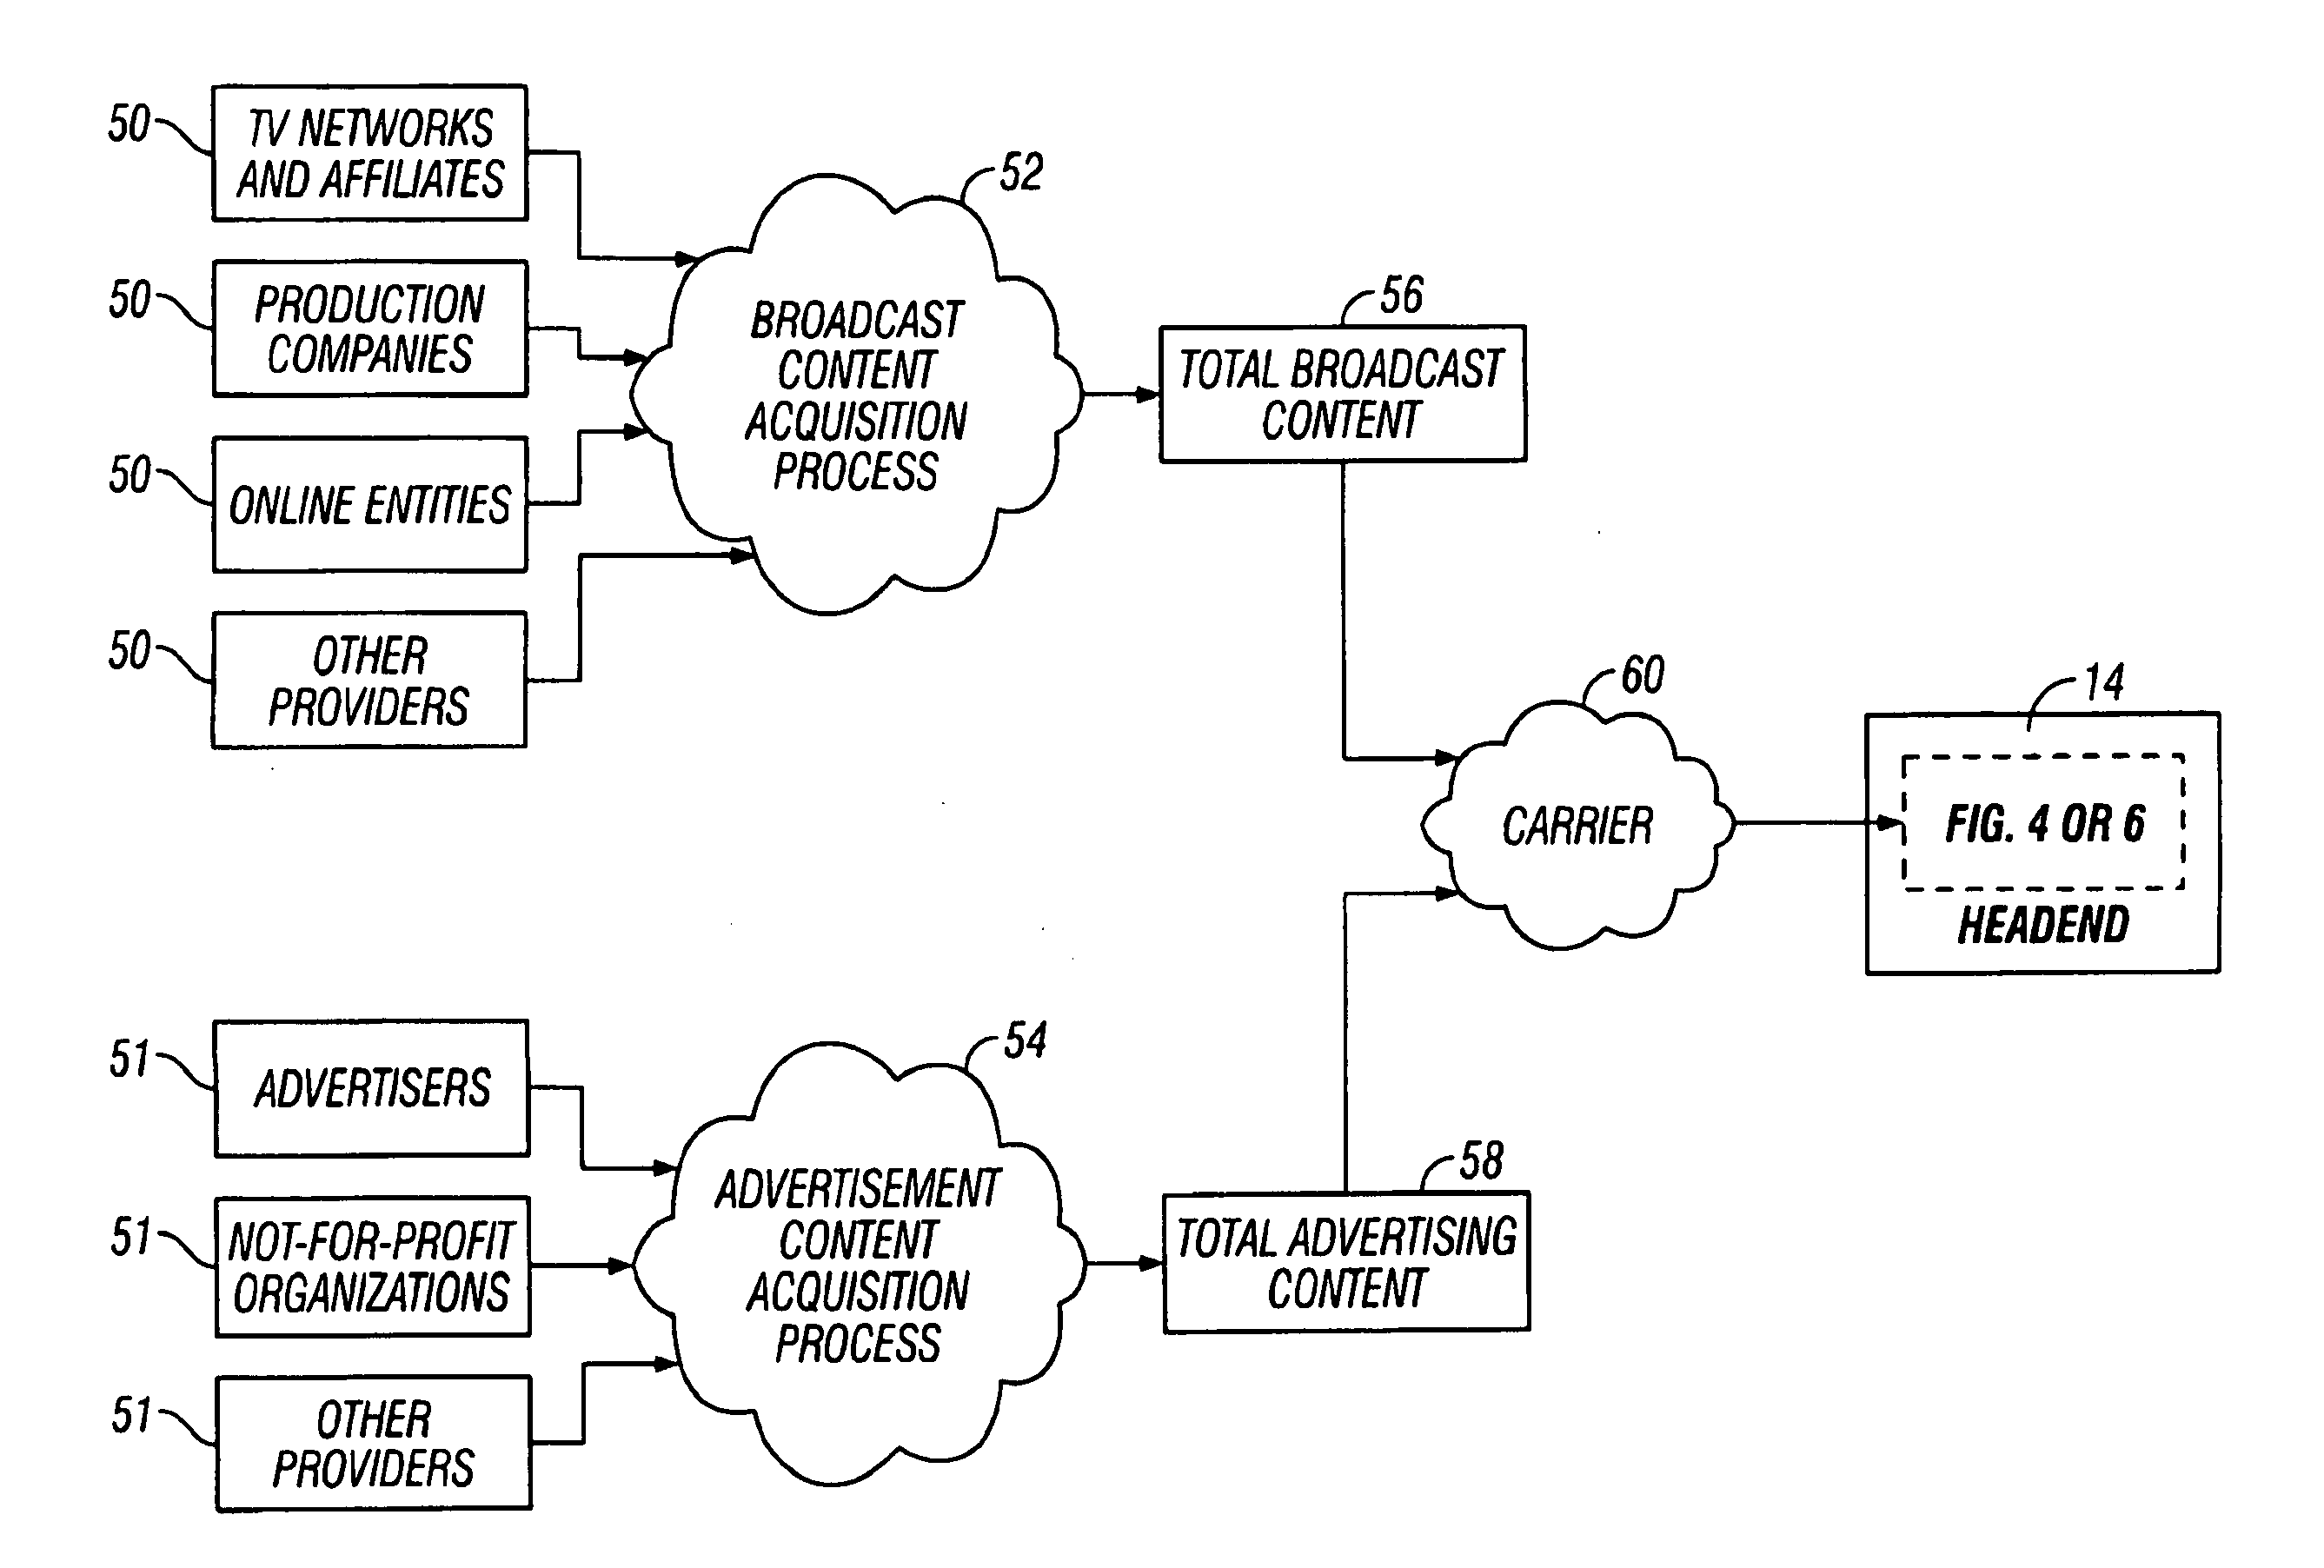 System and methods for network tv broadcasts for out-of-home viewing with targeted